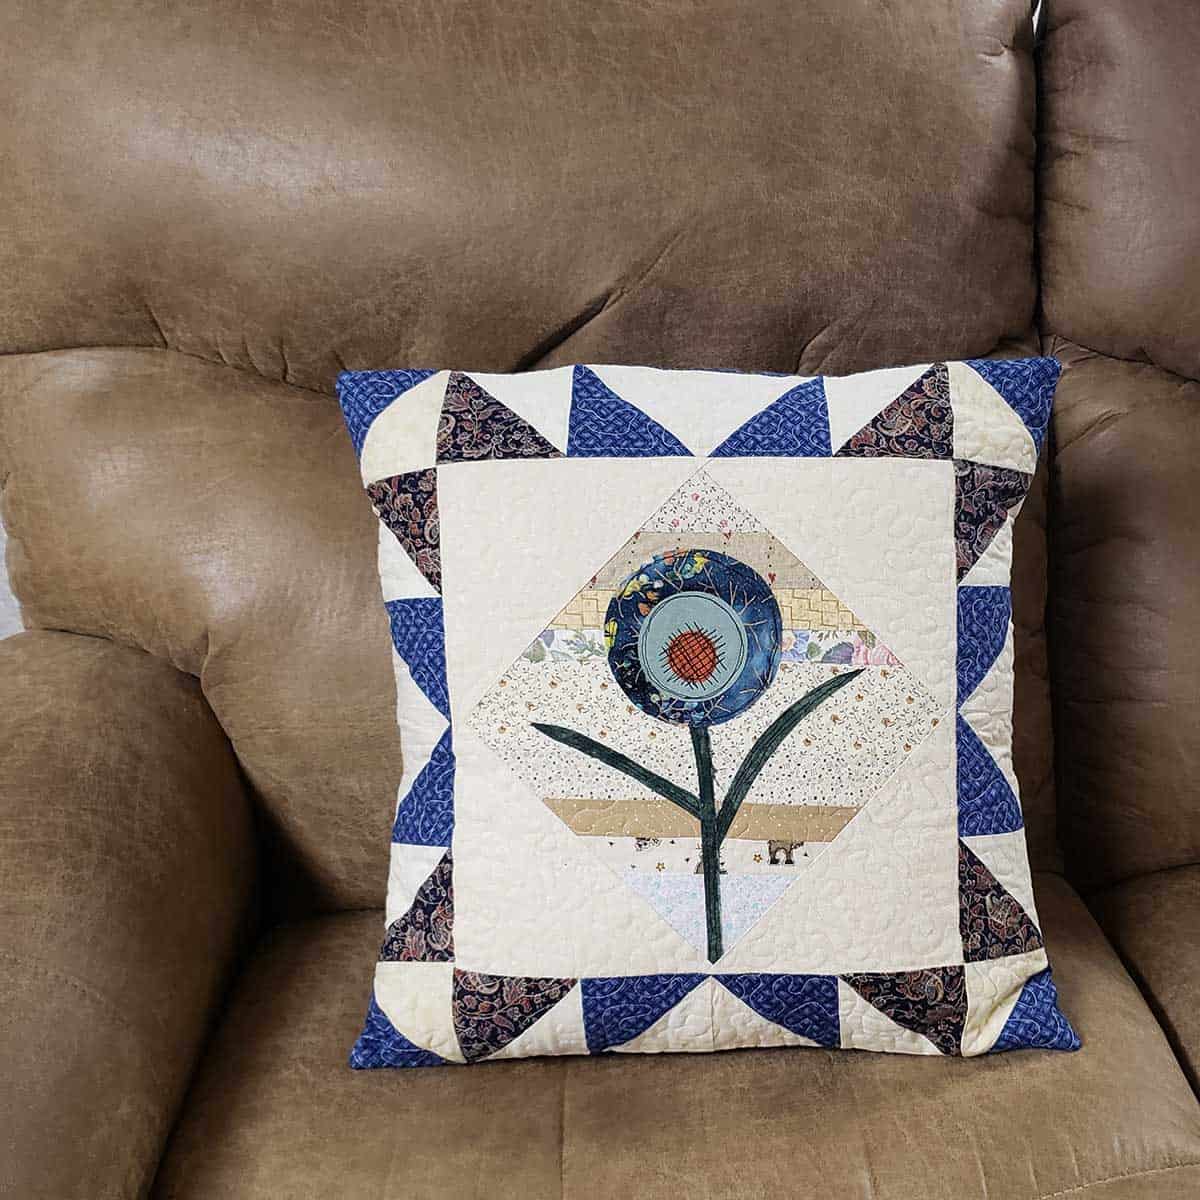 quilted pillow on chair